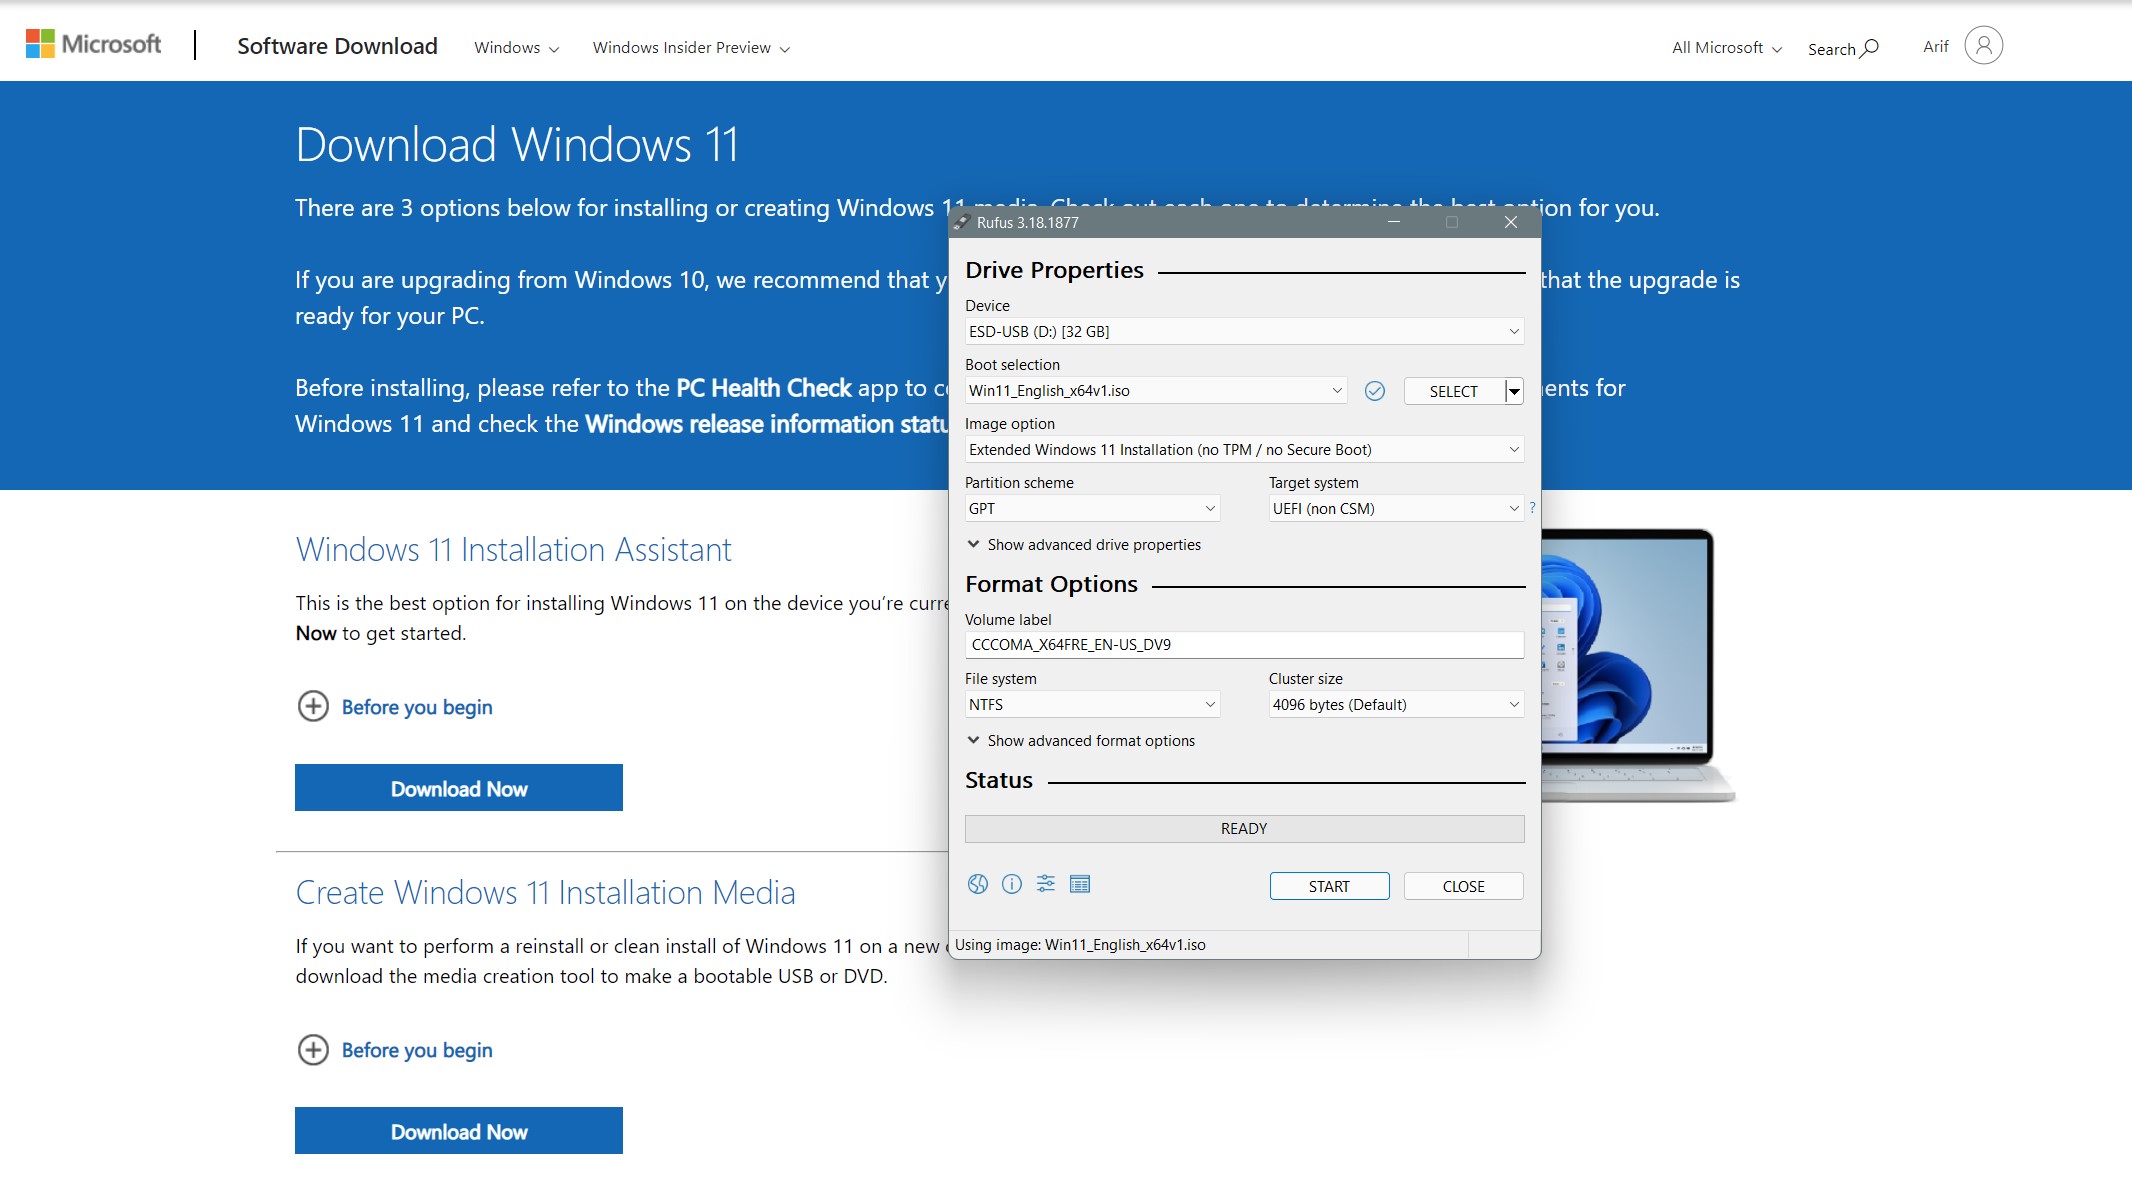 SOLVED: Download Windows 11 Now  Up & Running Technologies, Tech How To's